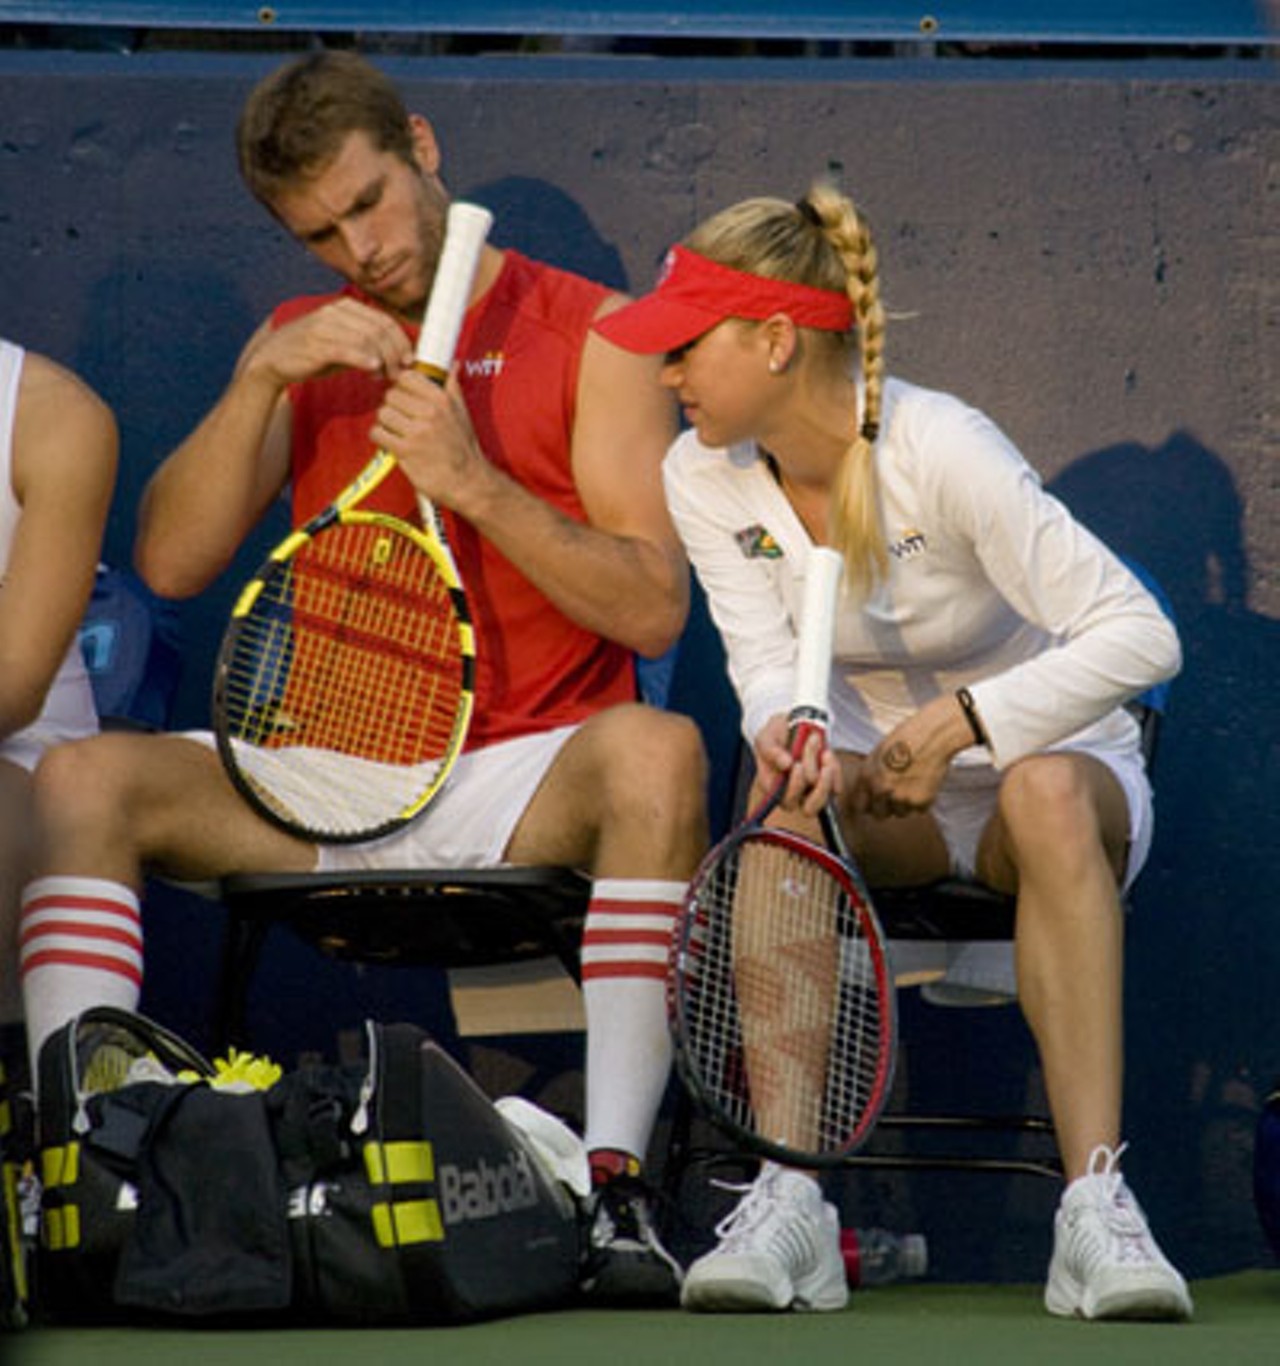 Anna Kournikova chats with teammate Travis Rettenmaier at the St. Louis Aces tournament against the Springfield Lasers.